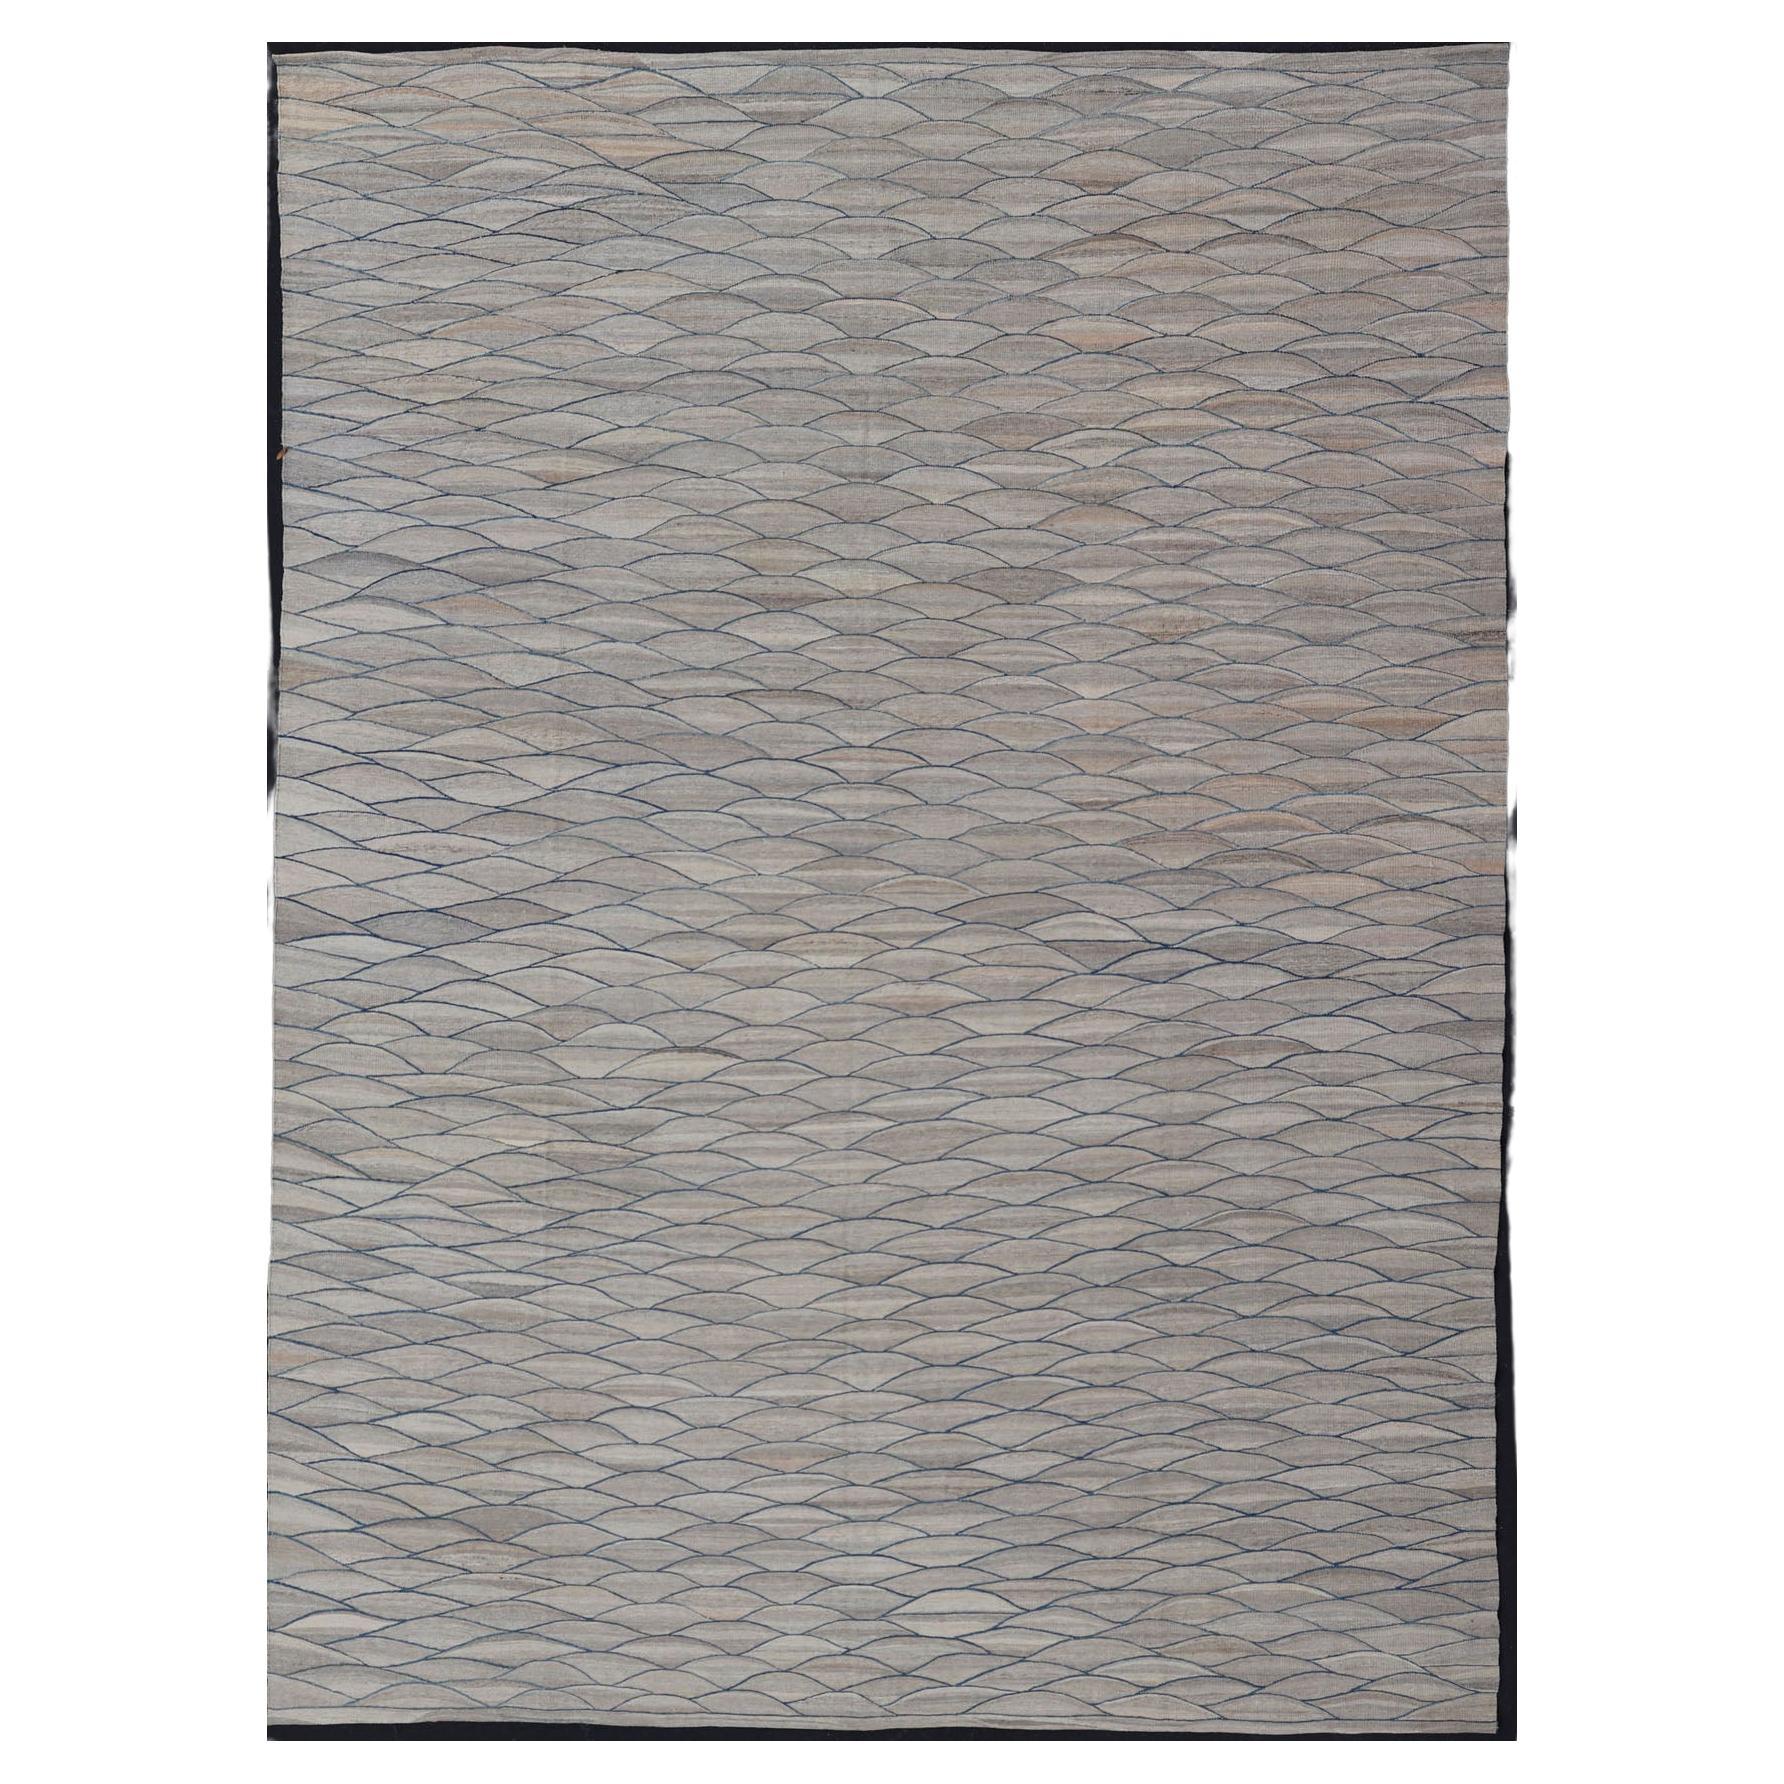 Large Modern Flat Weave Kilim in Wool with Shades of Gray and Rich Blue